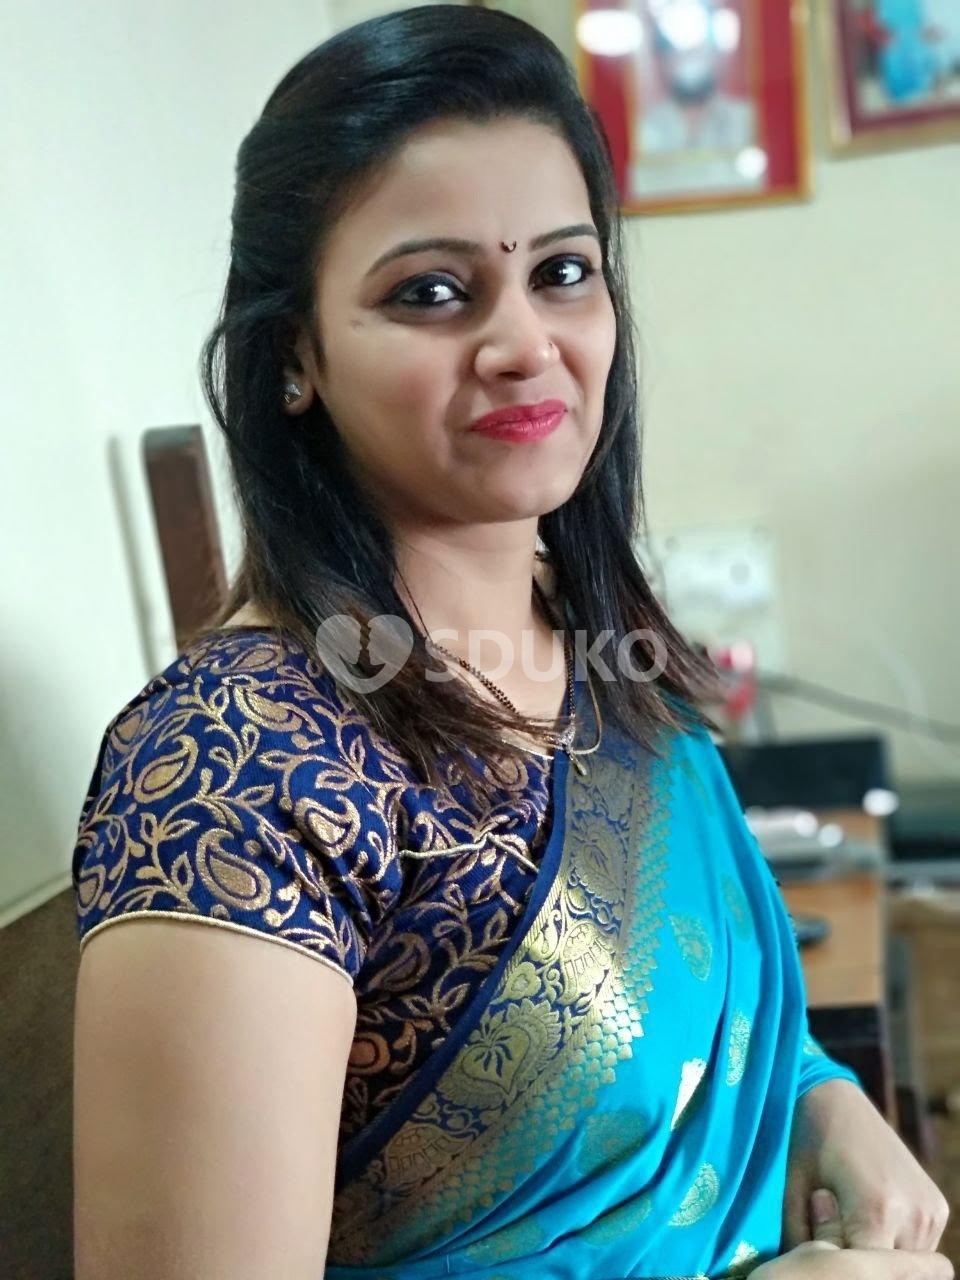 Koramangala ..low price 🥰 100% SAFE AND SECURE TODAY LOW PRICE UNLIMITED ENJOY HOT COLLEGE GIRL HOUSEWIFE AUNTIES AVA